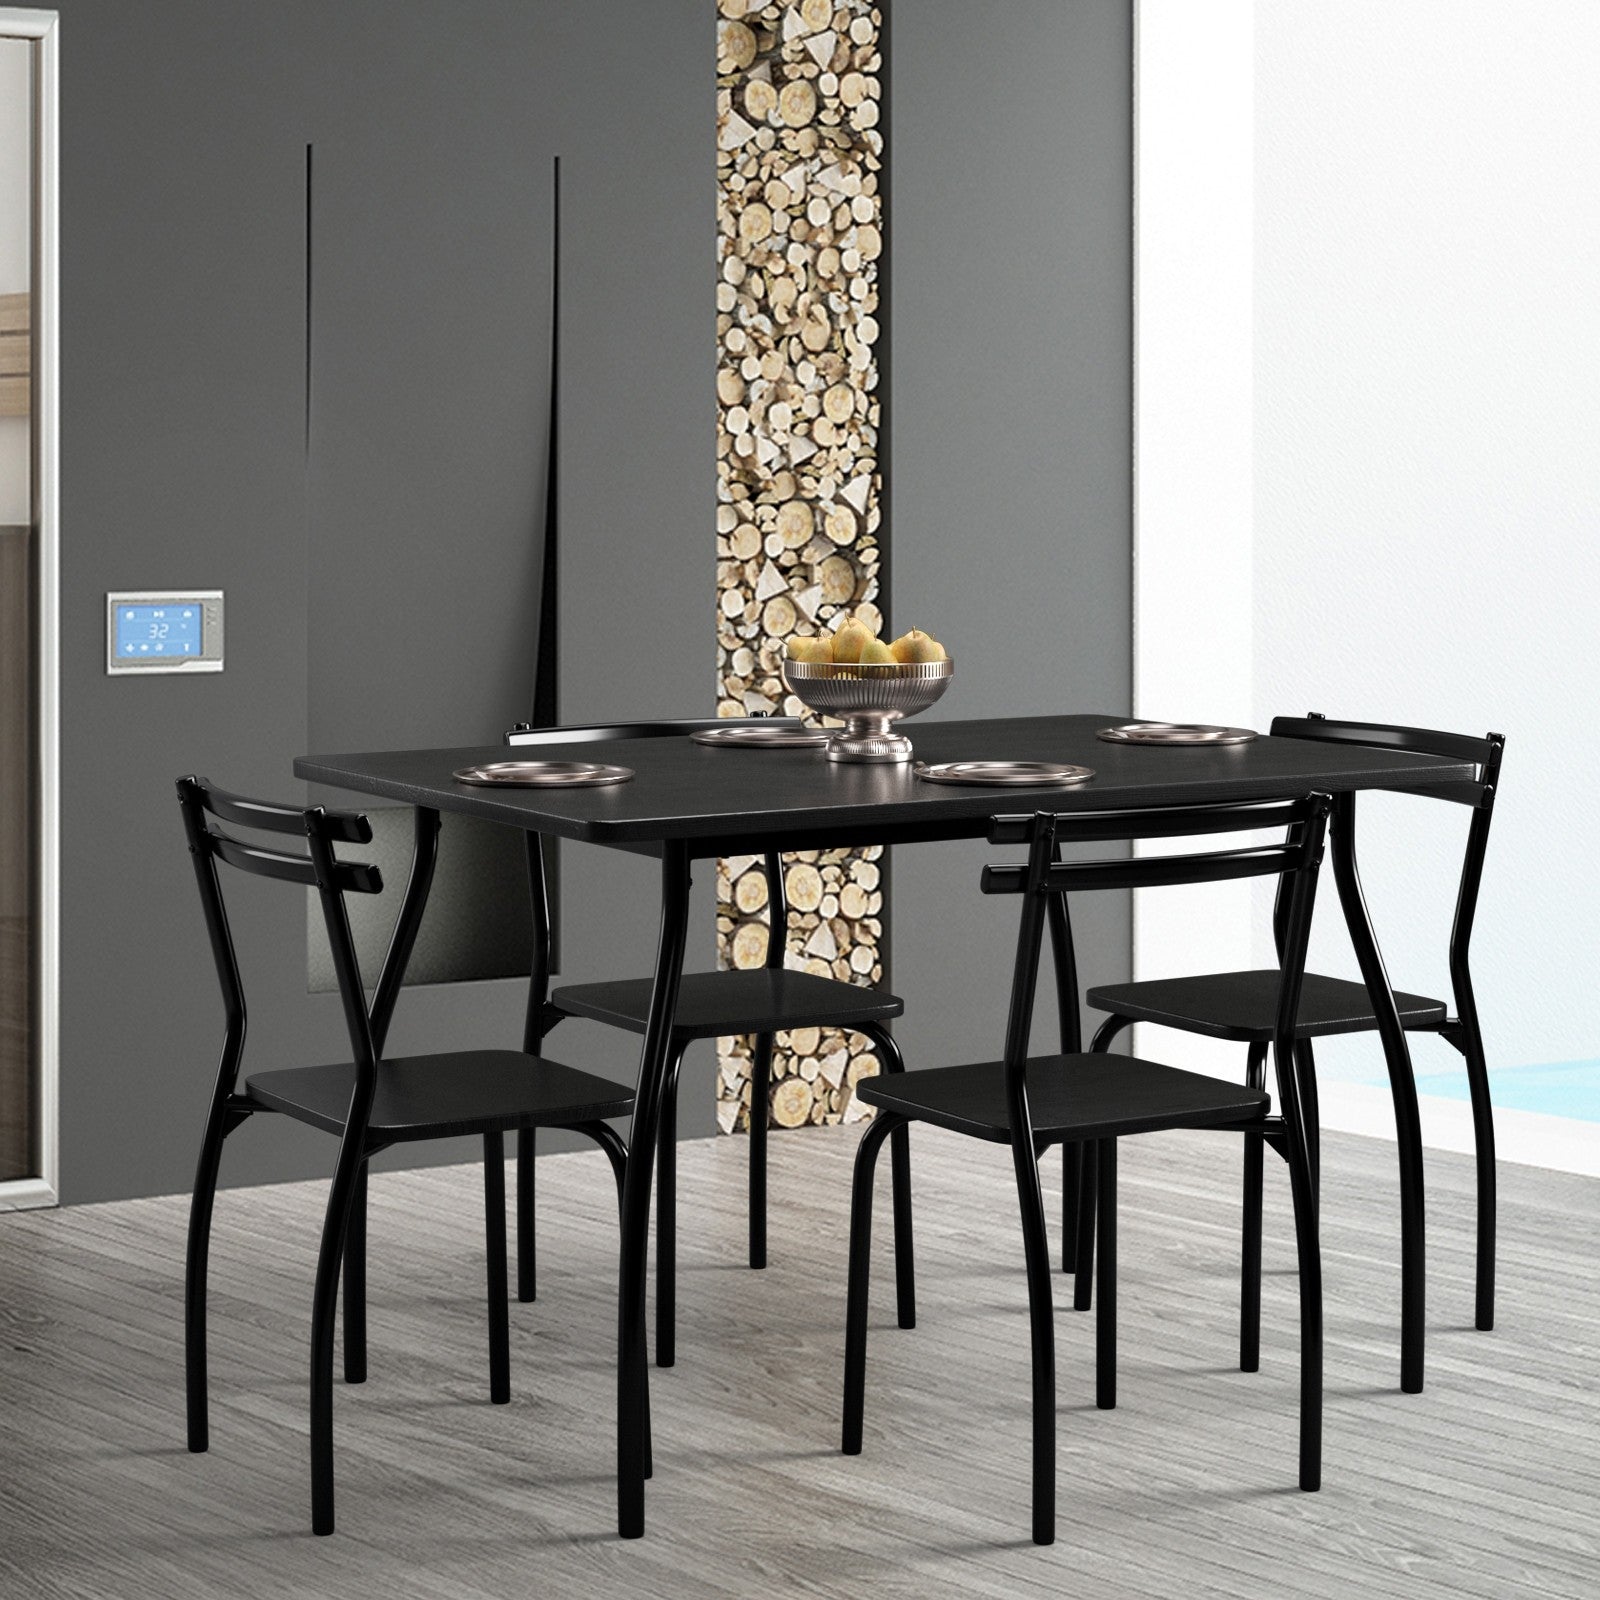 Giantex 5Pcs Dining Table Set for 4, Modern Metal and Wood Indoor Rectangular Dining Table Furniture